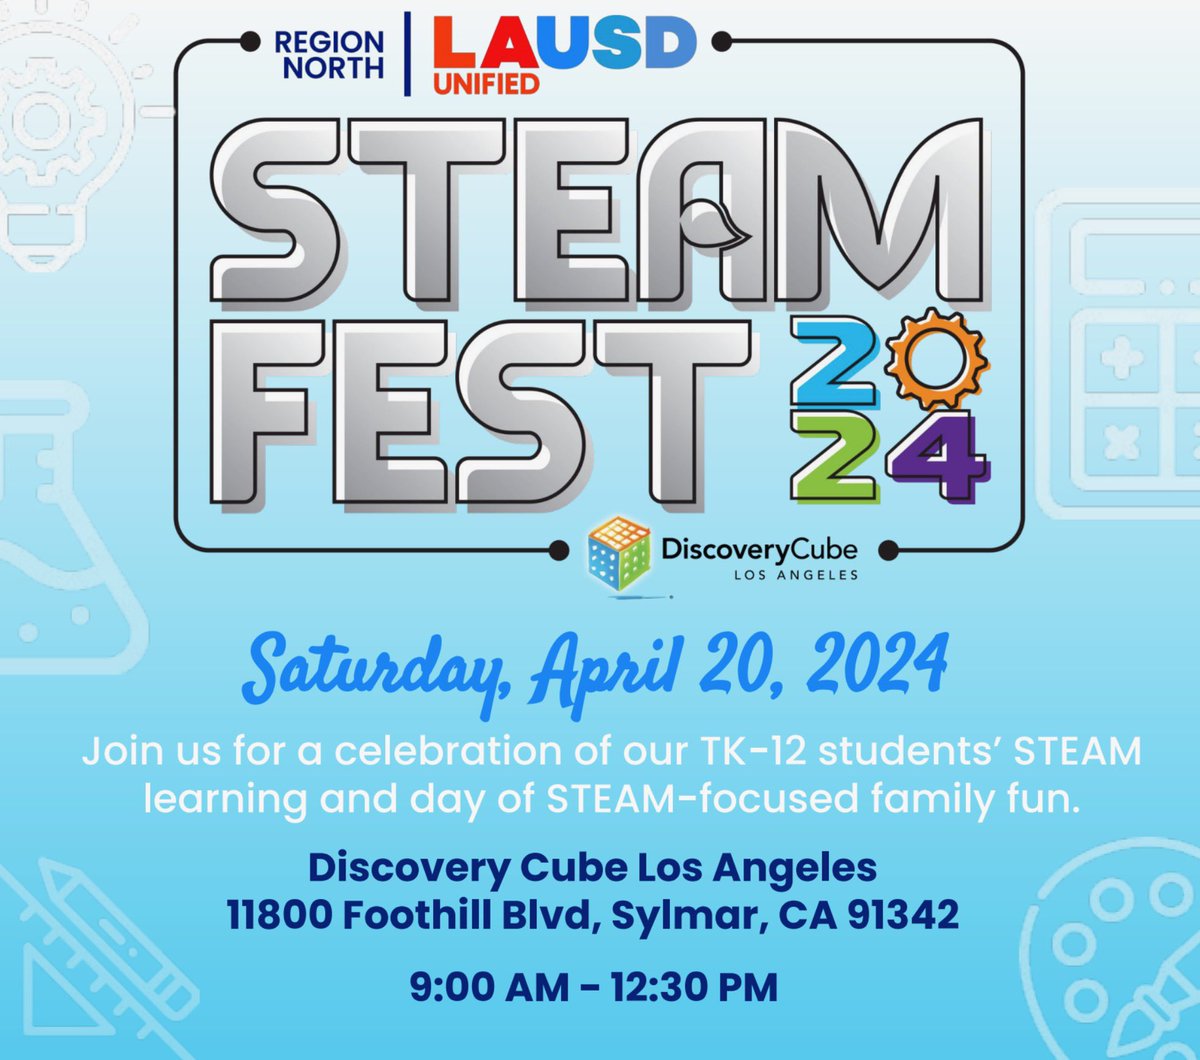 It’s almost time for Region North’s SteamFest at the Discovery Cube! Please rsvp now to receive tickets and free swag! bit.ly/region-north-s… #RegionNorth #ReadyfortheWorld #science #steam @thediscoverycube @discoverycubela #steamfest